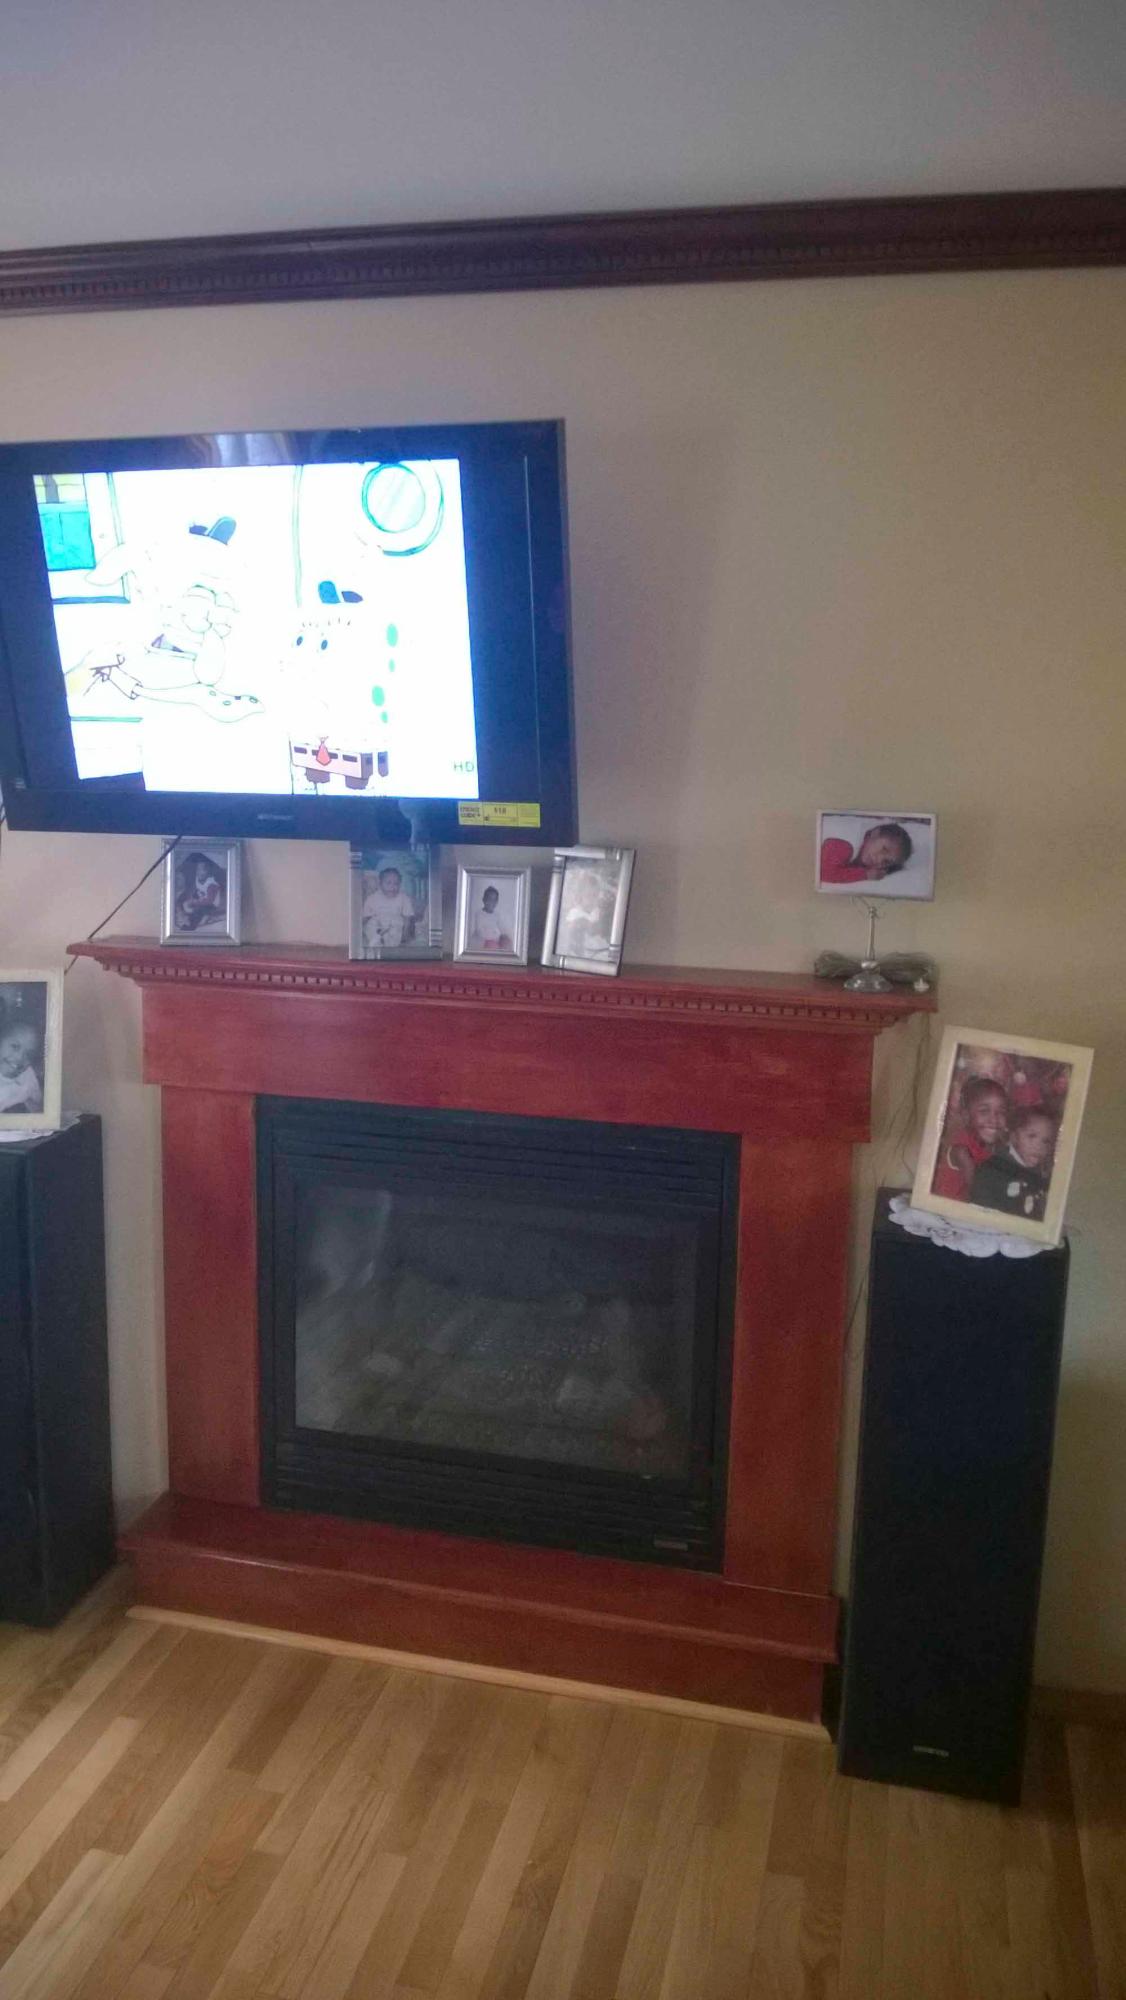 Fireplace facelift: before